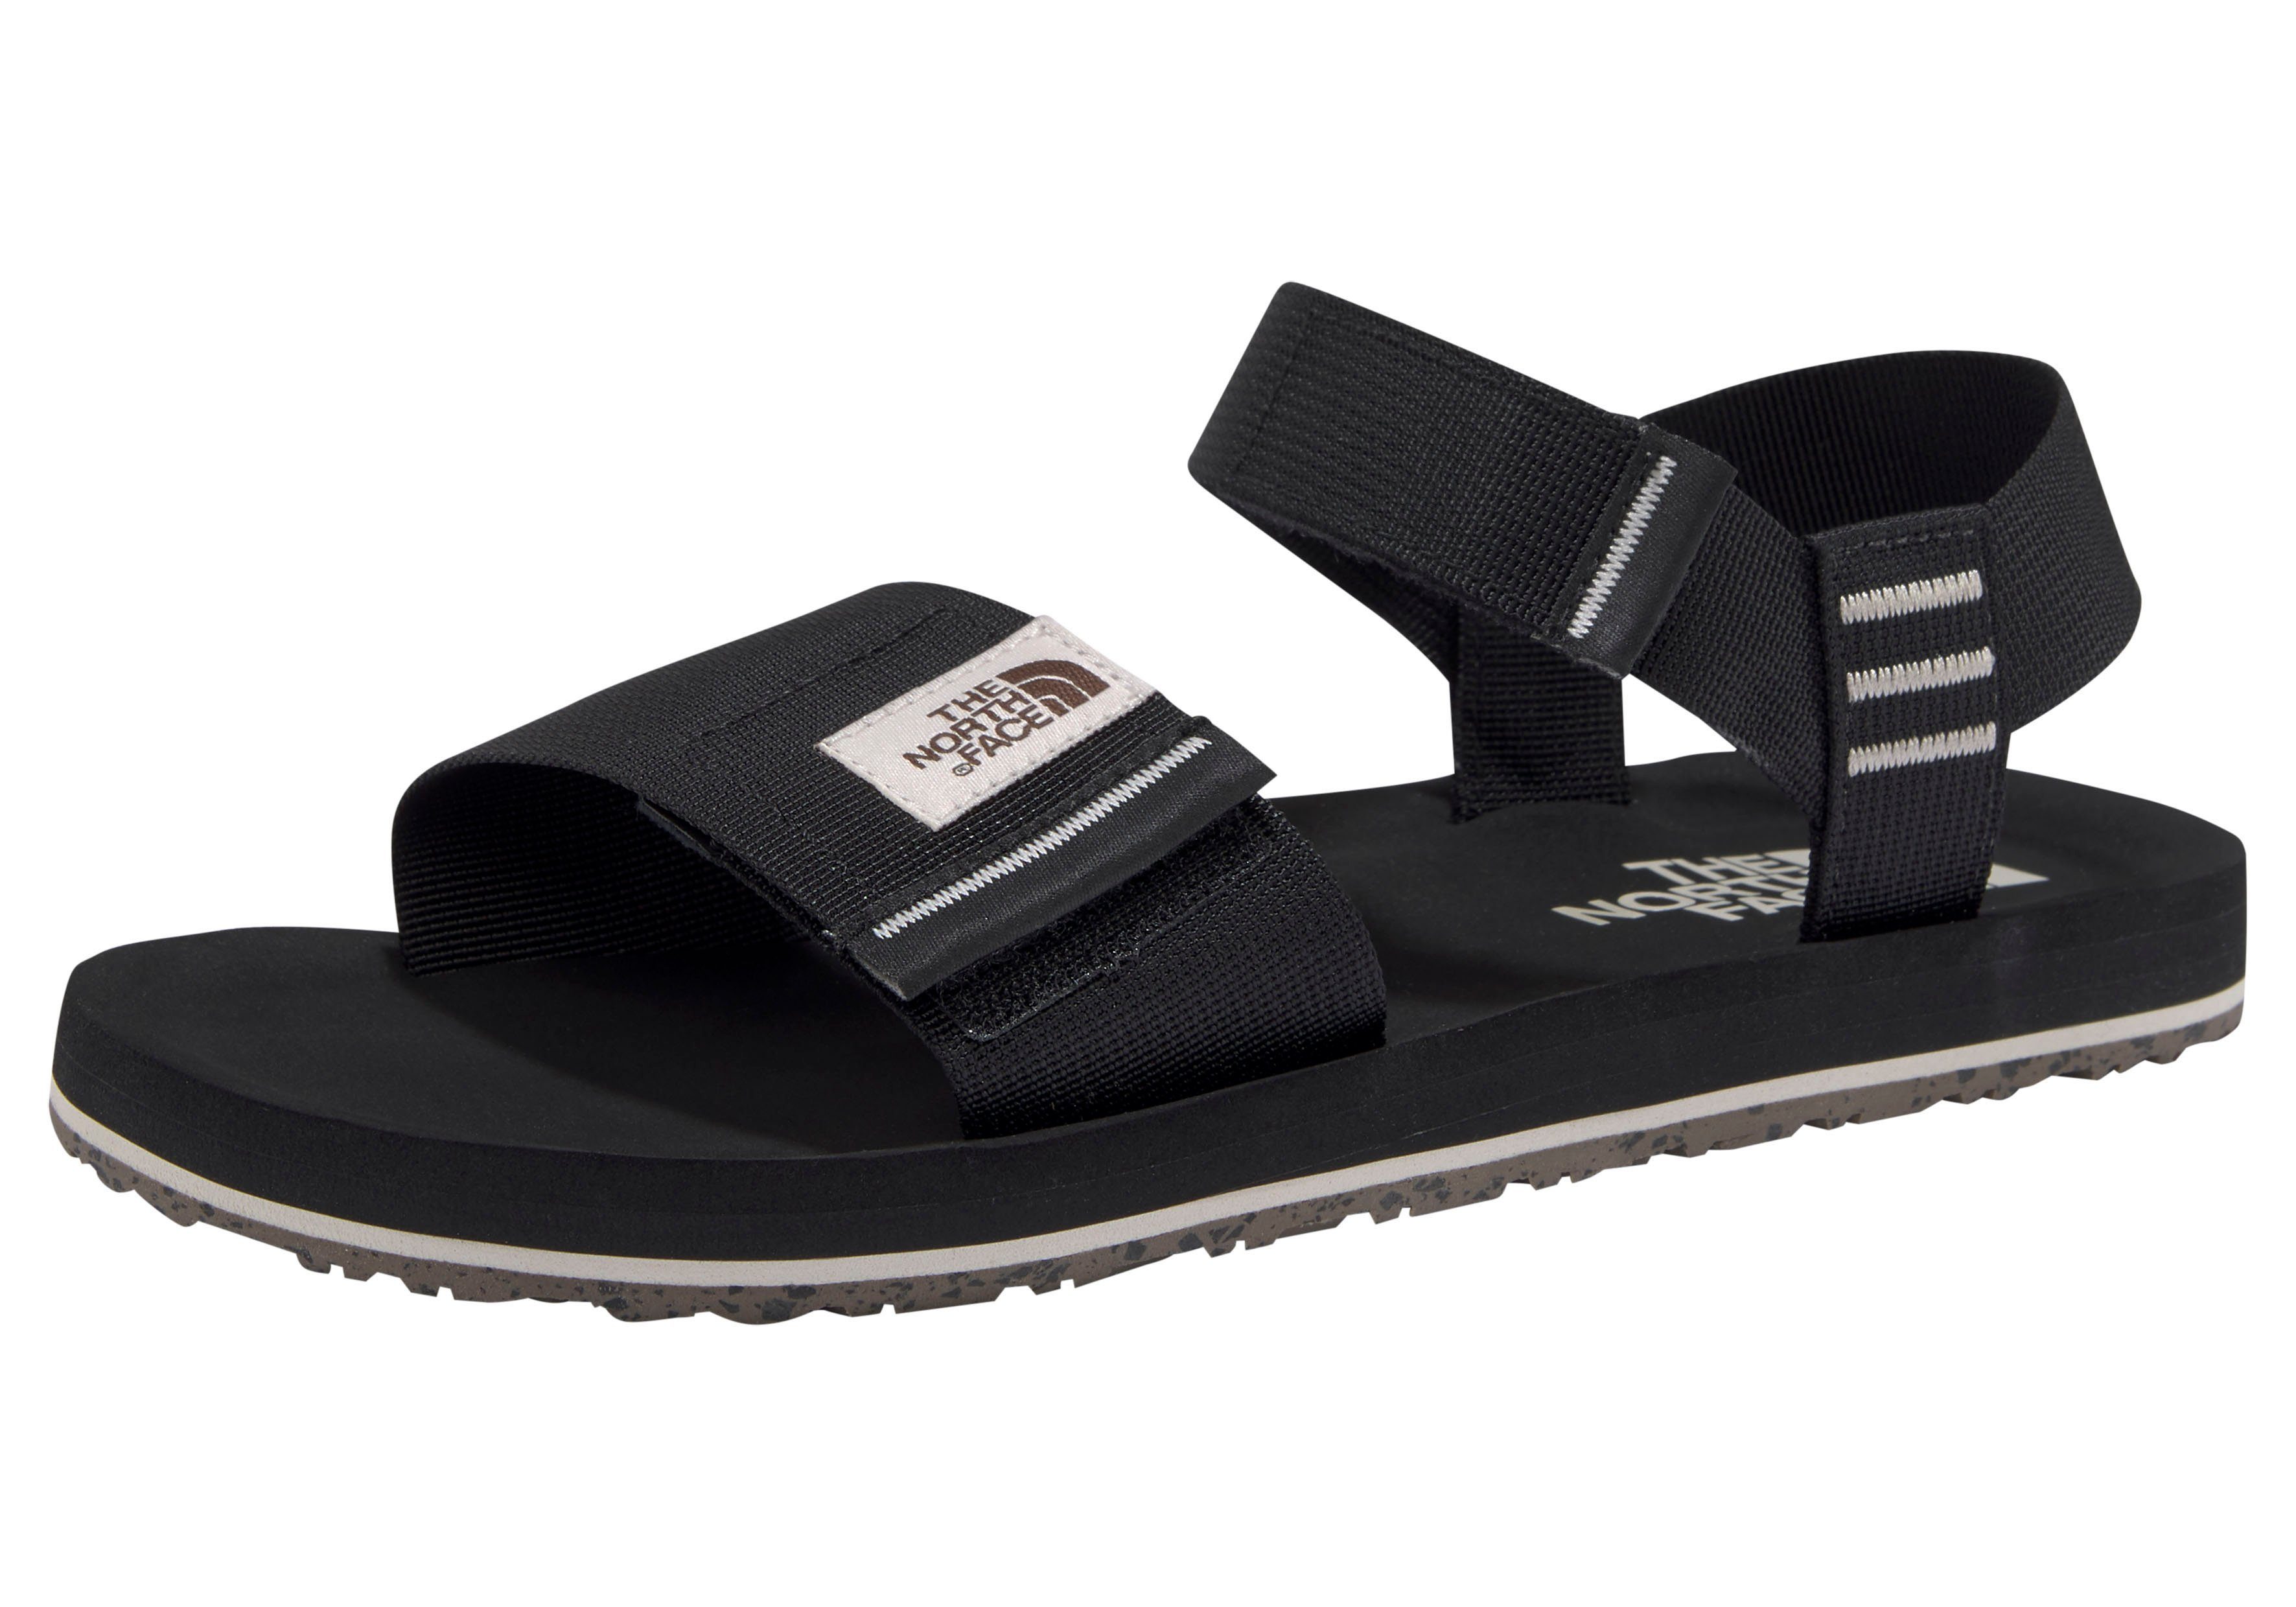 The North Face »Skeena Sandal W« Outdoorsandale | OTTO